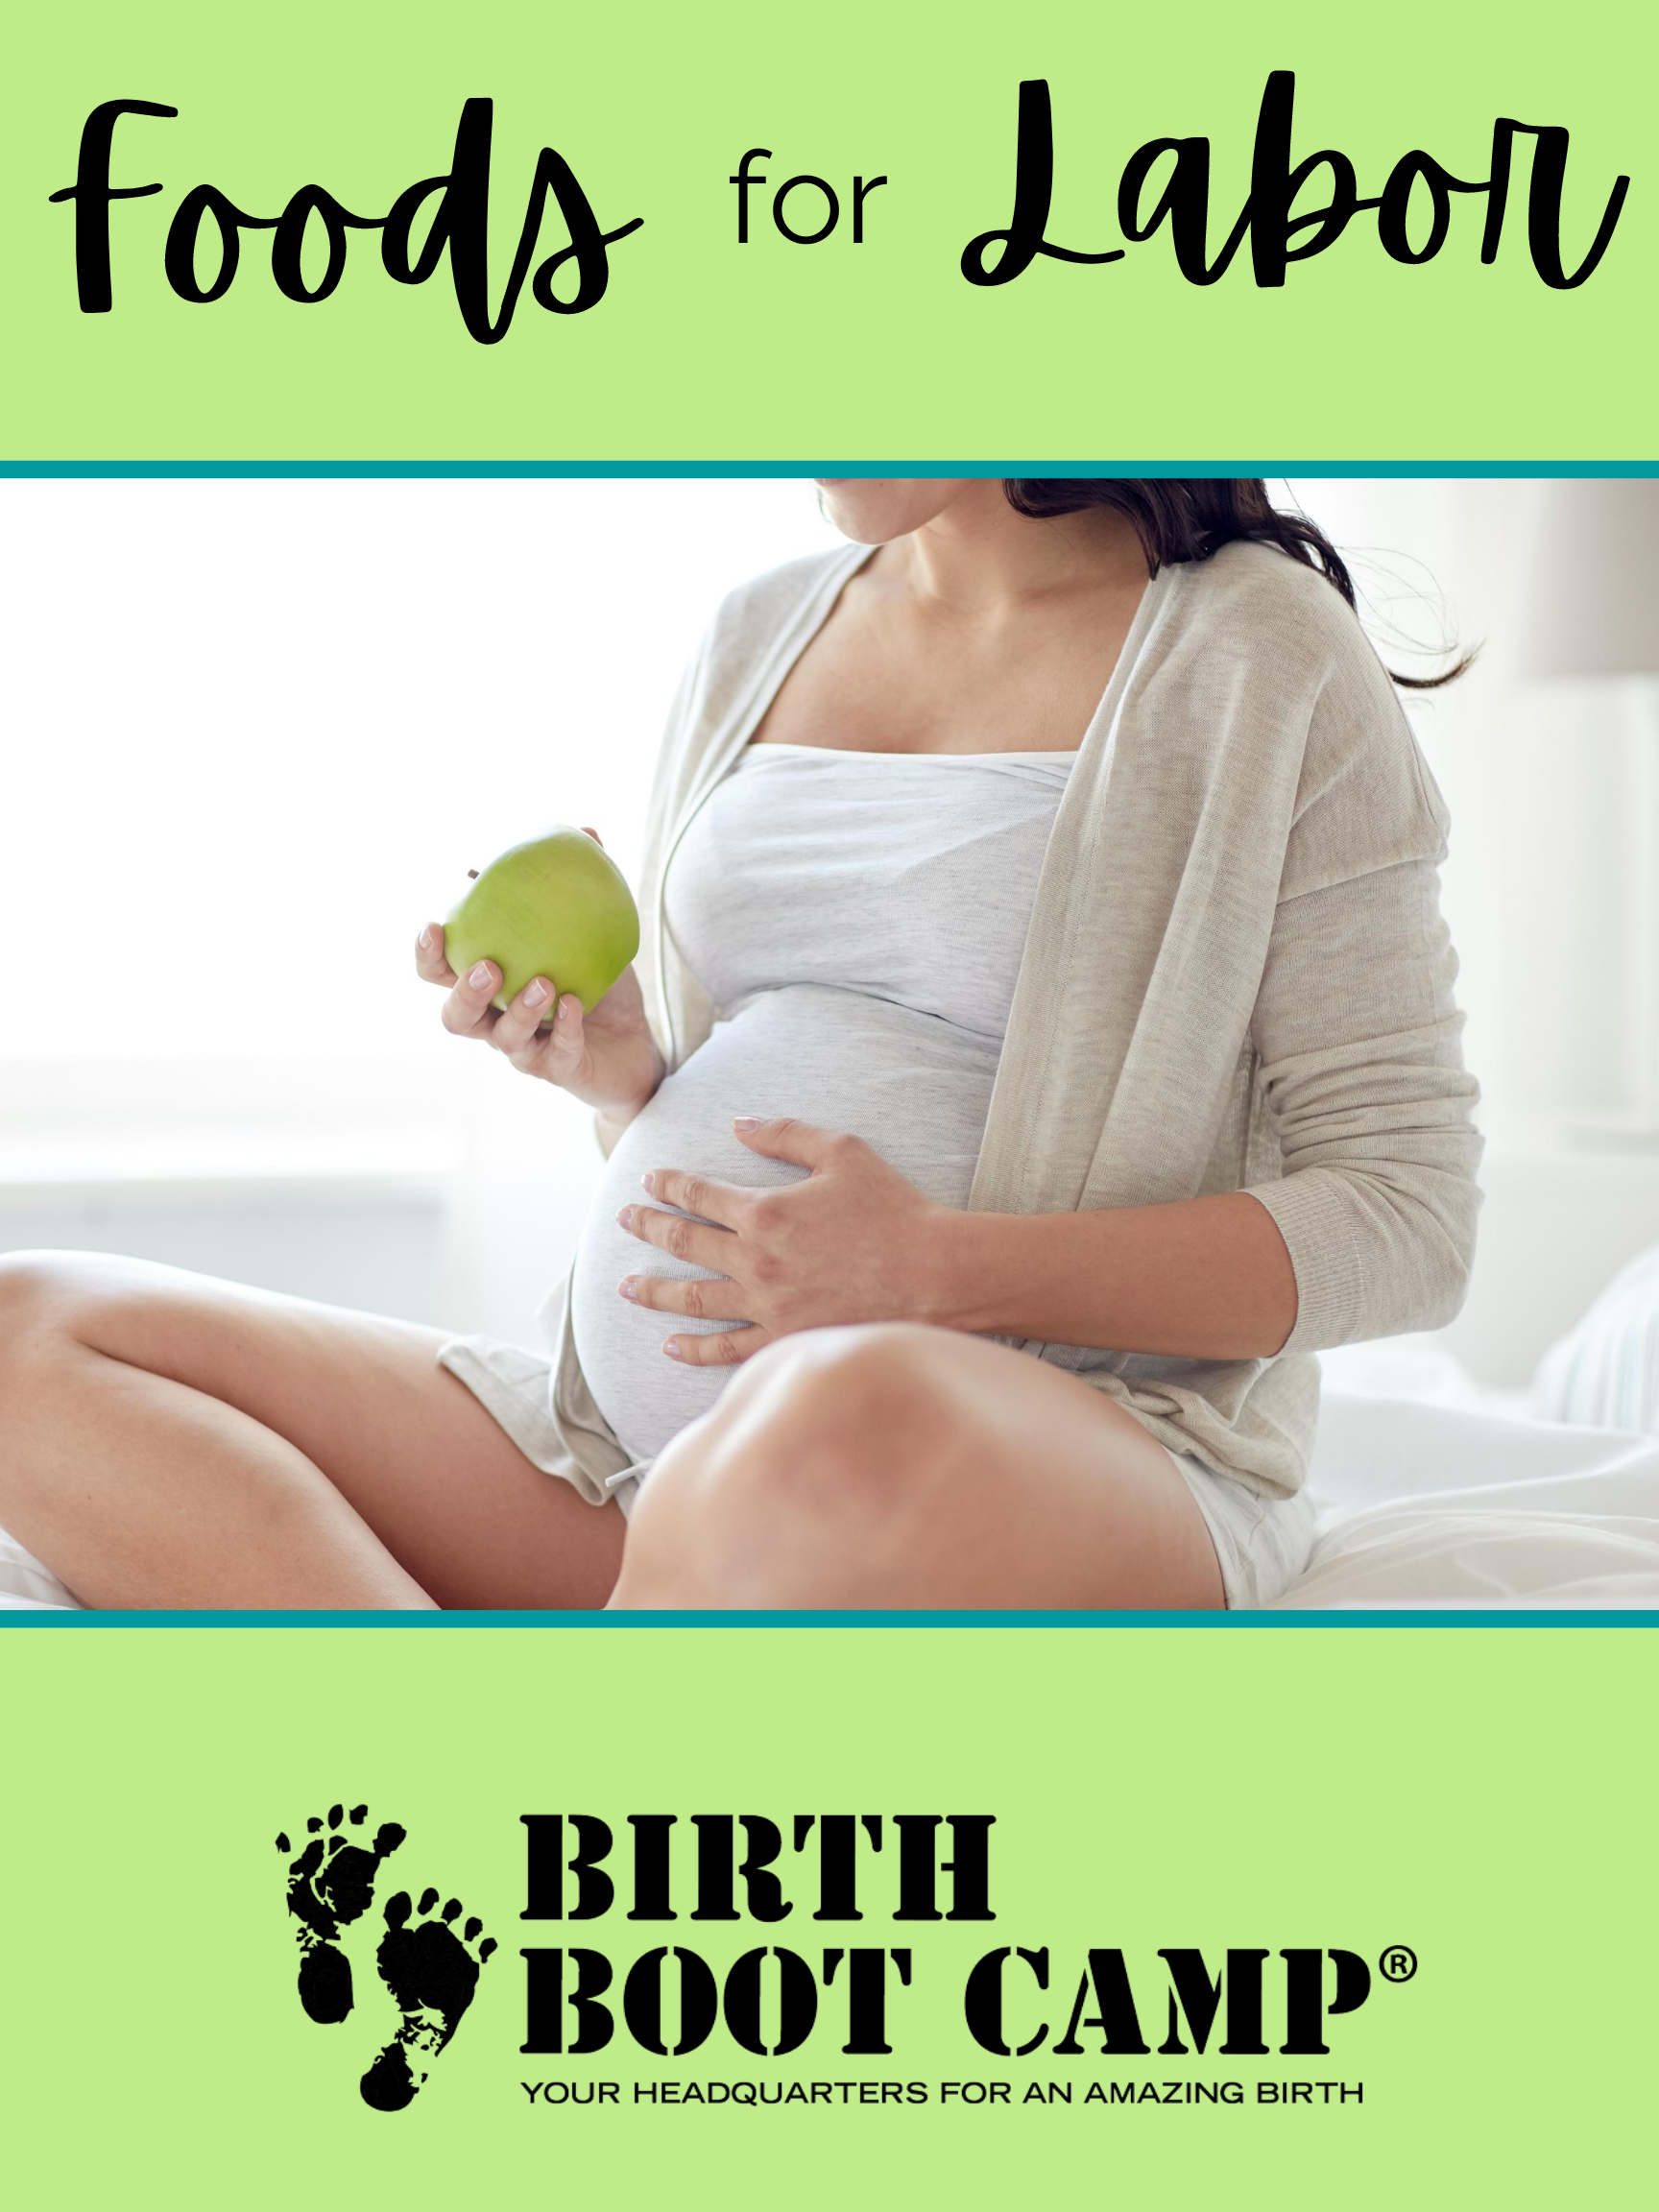 What Should I Eat & Drink During Labor?